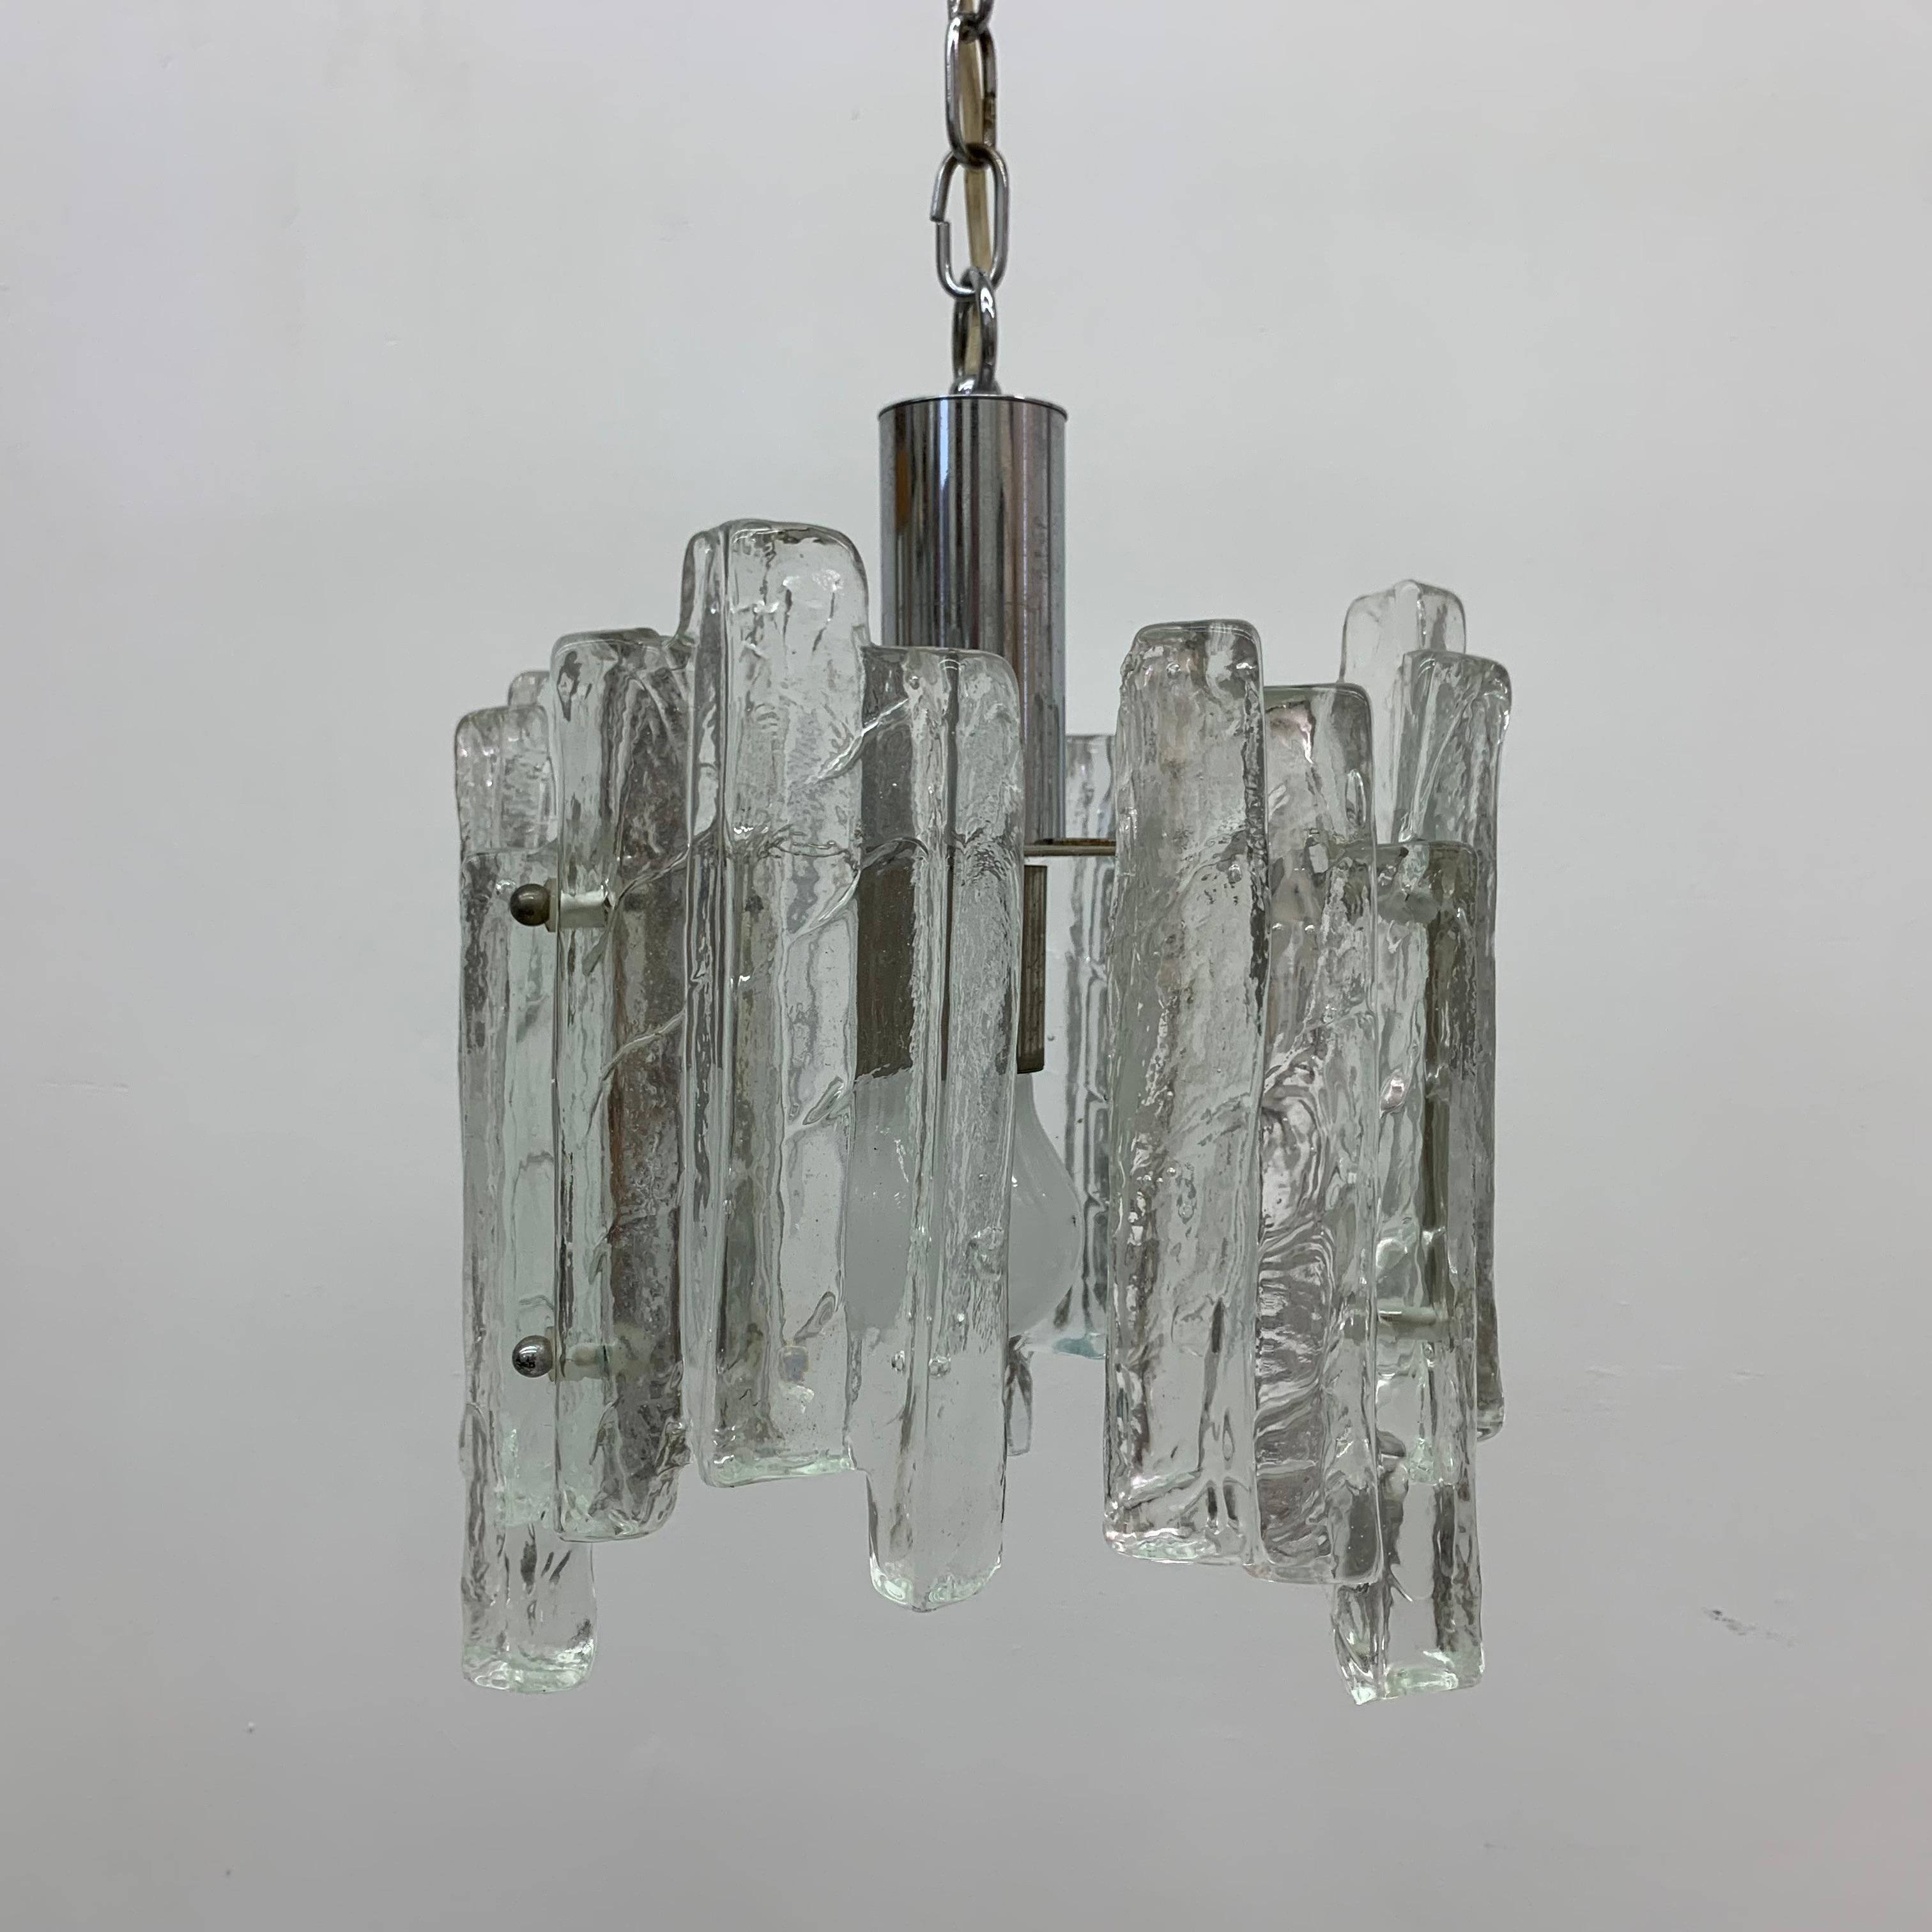 Hanging lamp in Frosted Ice Glass by J. T. Kalmar for Kalmar Franken KG, 1960s For Sale 6